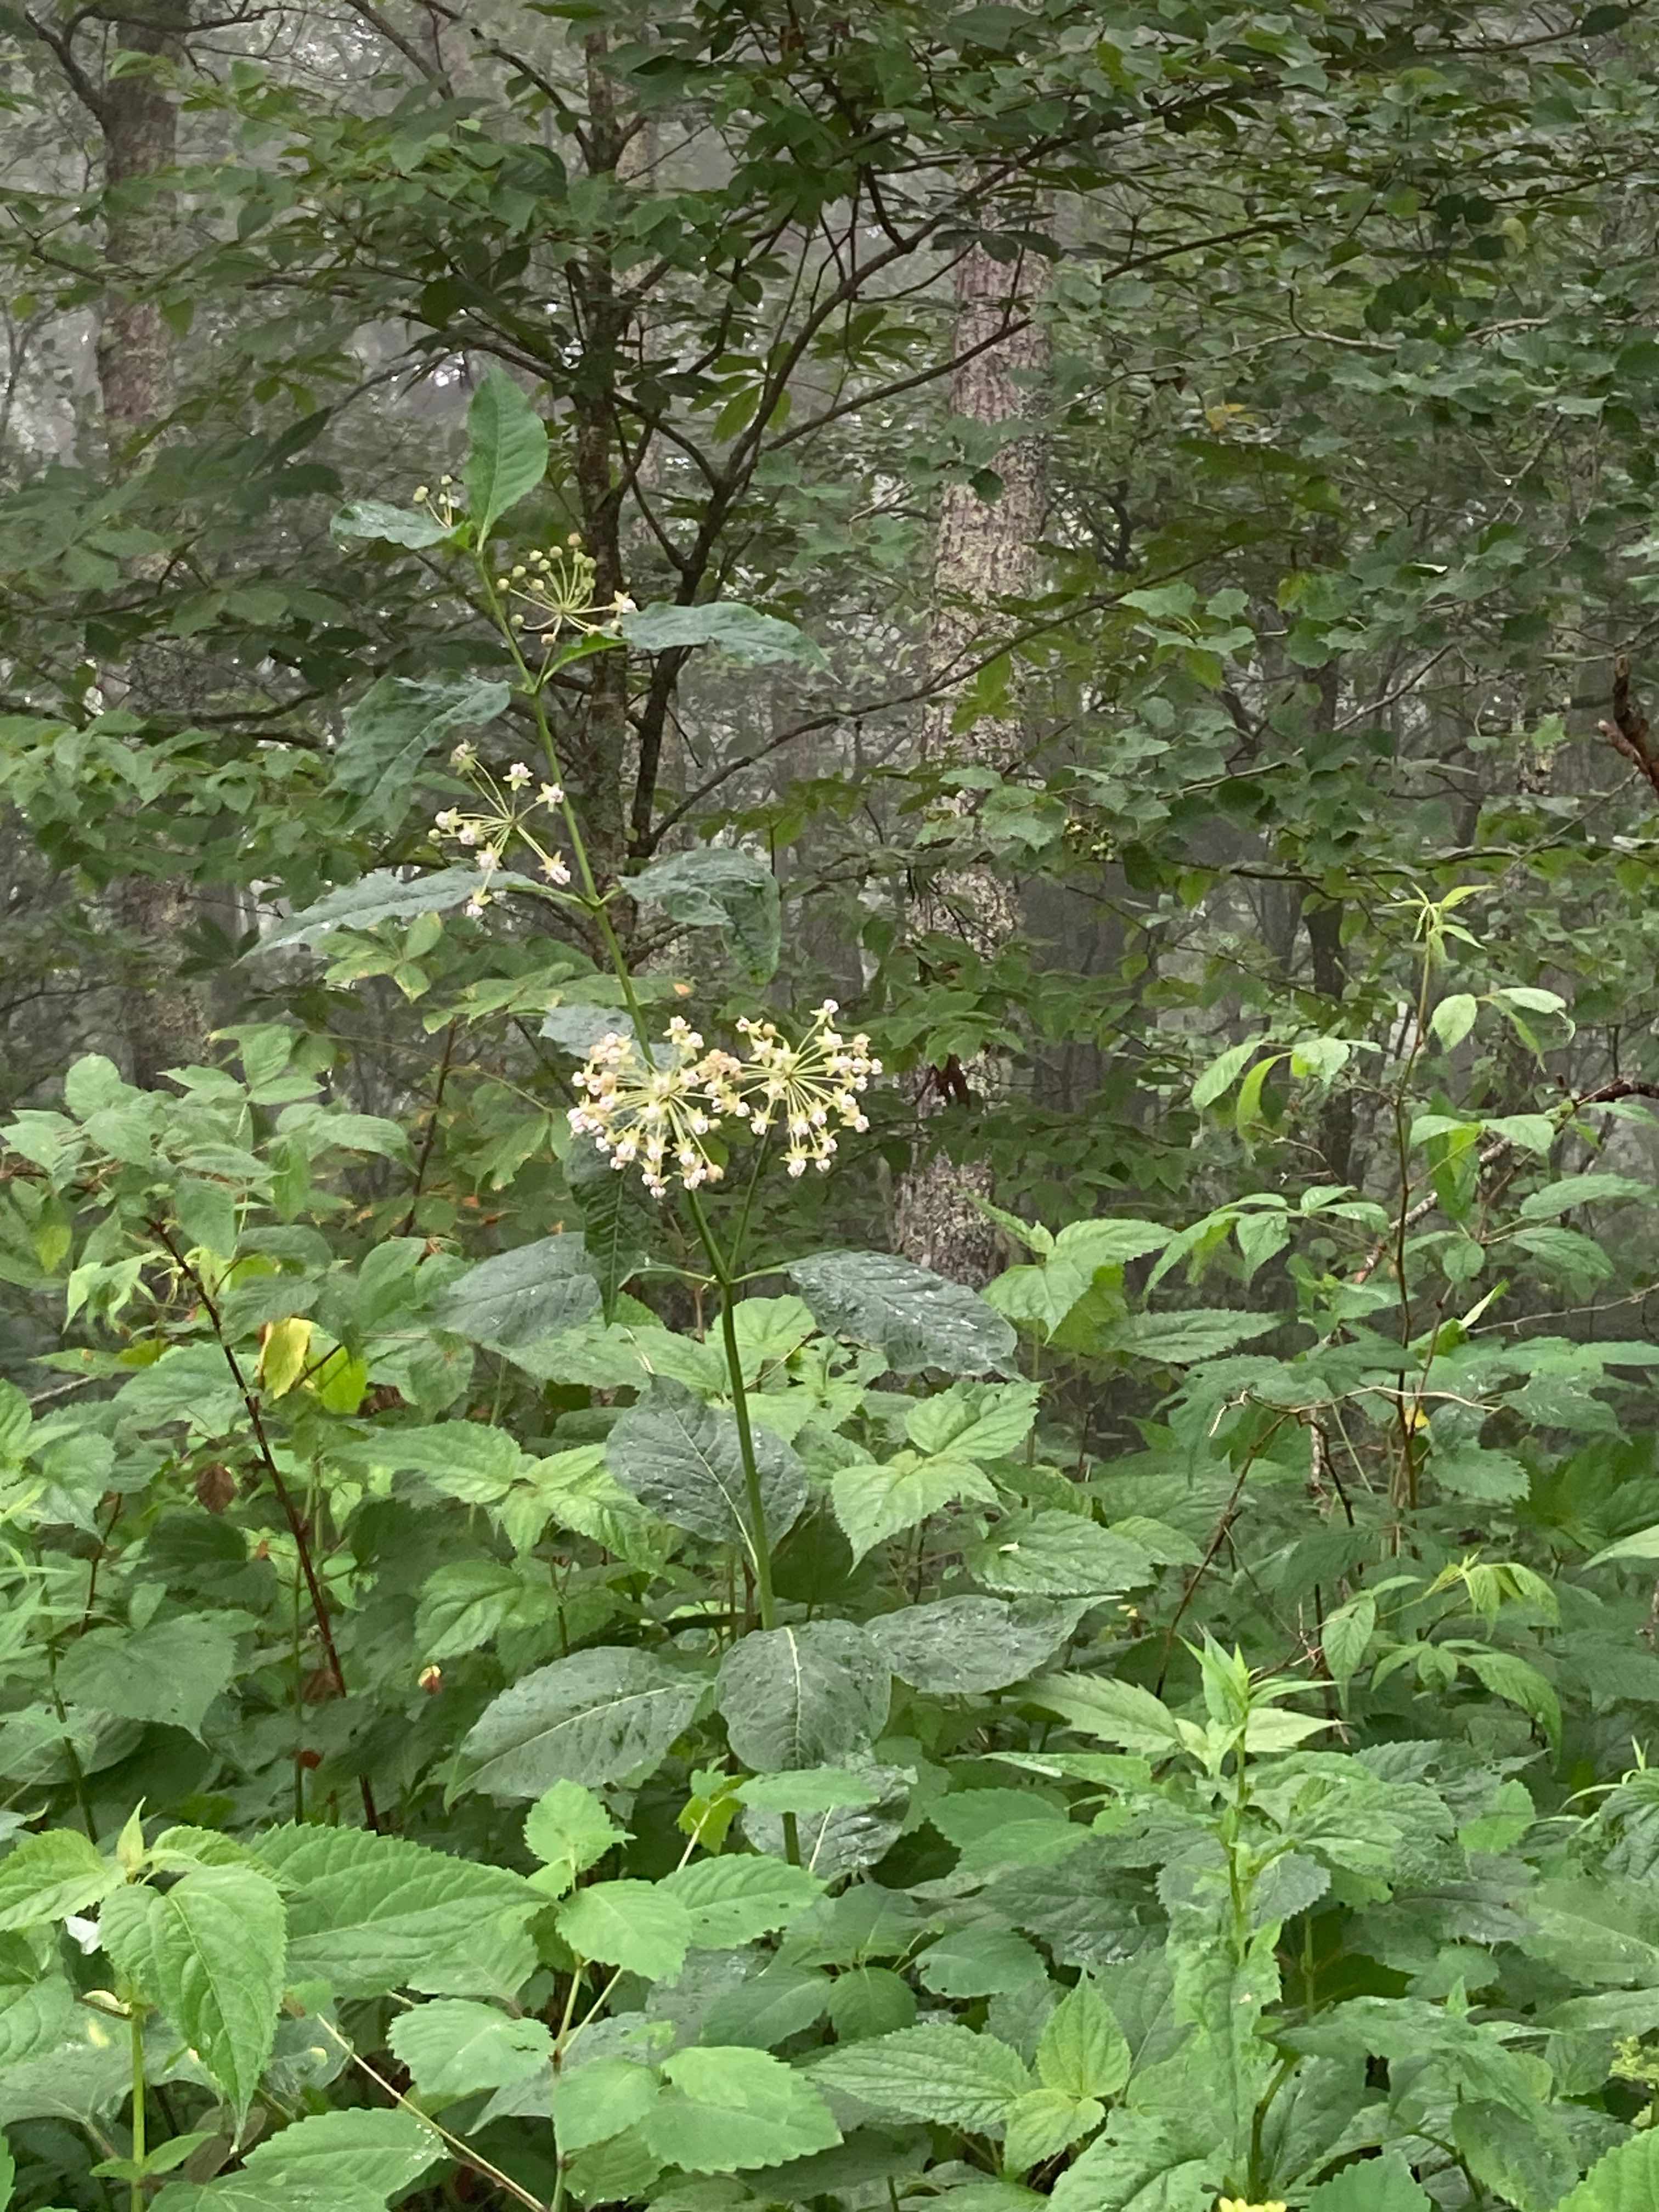 The Scientific Name is Asclepias exaltata. You will likely hear them called Poke Milkweed, Tall Milkweed. This picture shows the A relatively tall plant that grows in rich, mesic forests. of Asclepias exaltata